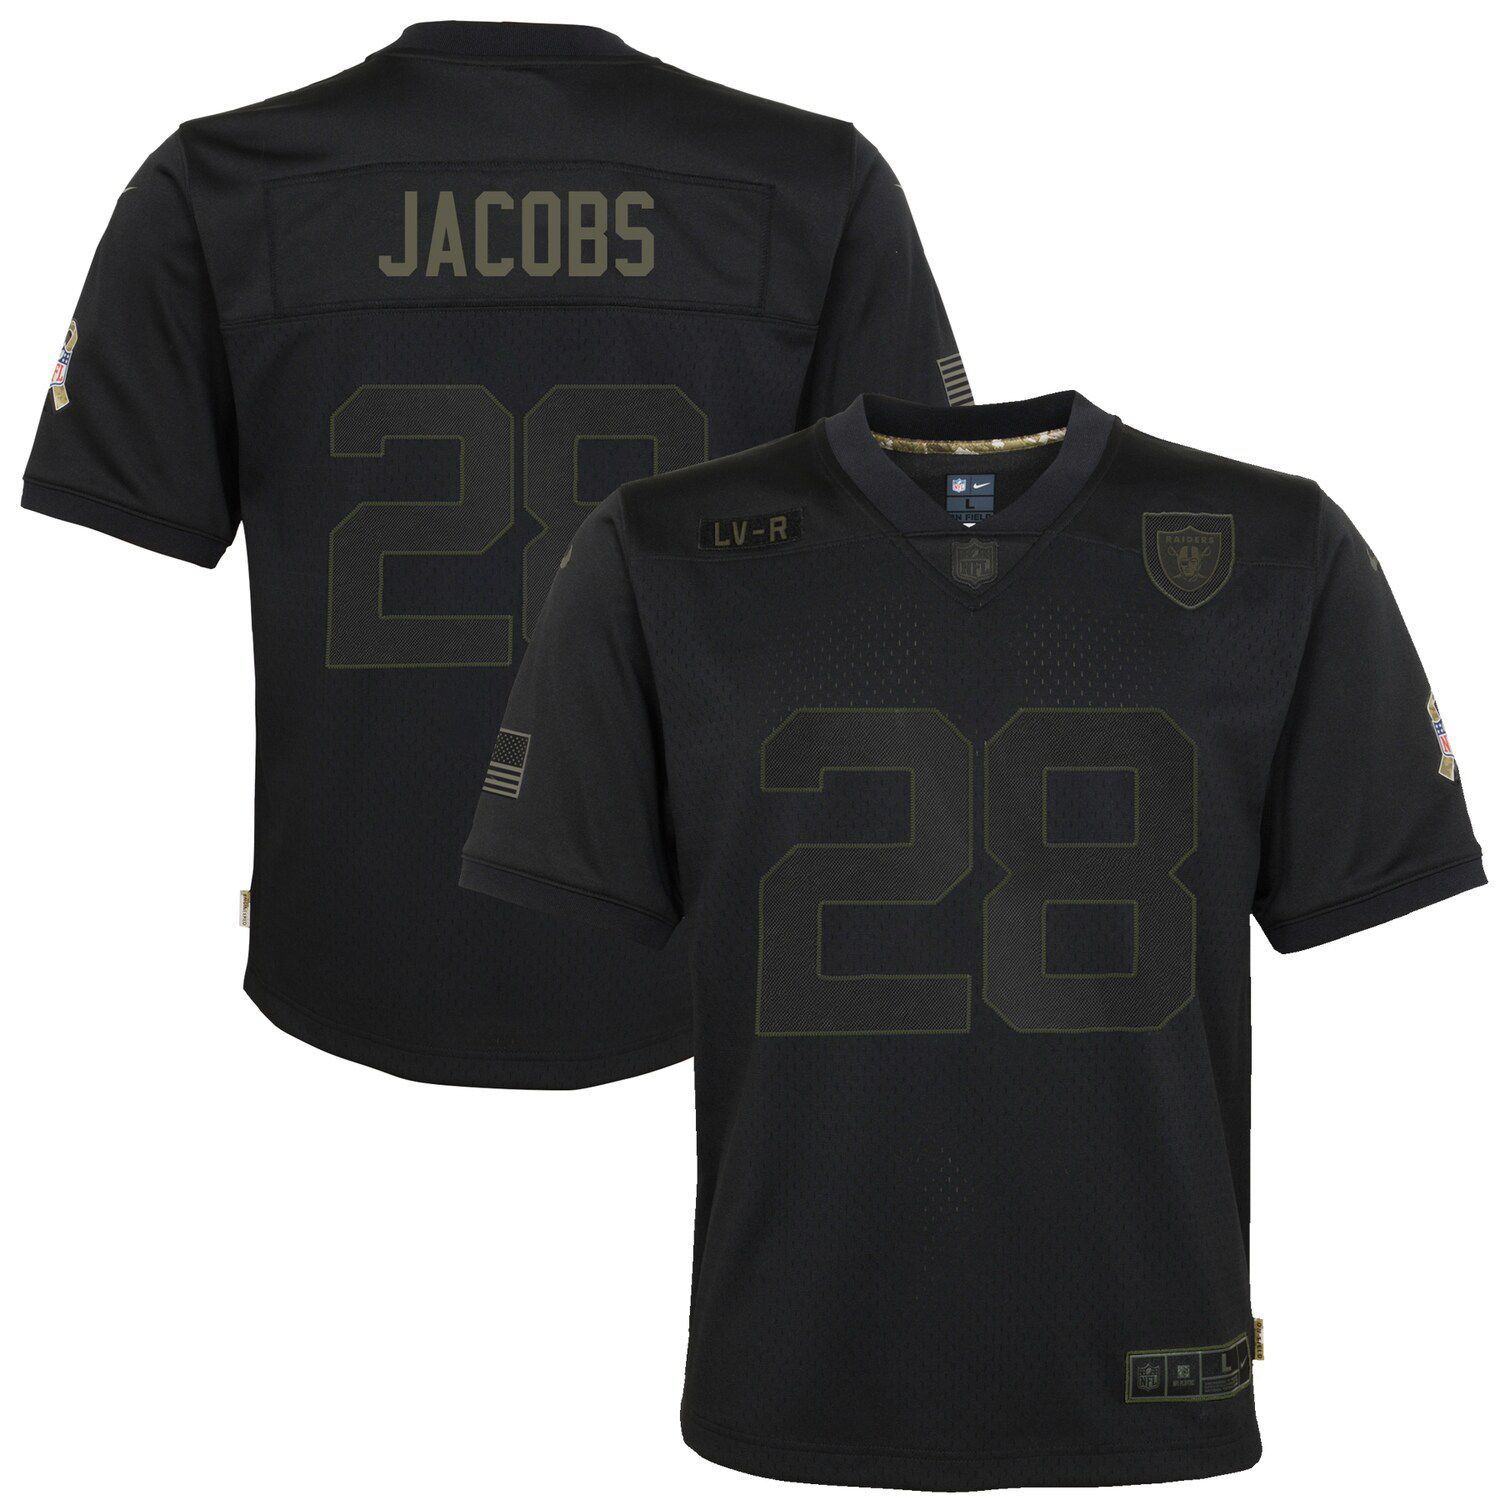 nike salute to service jersey